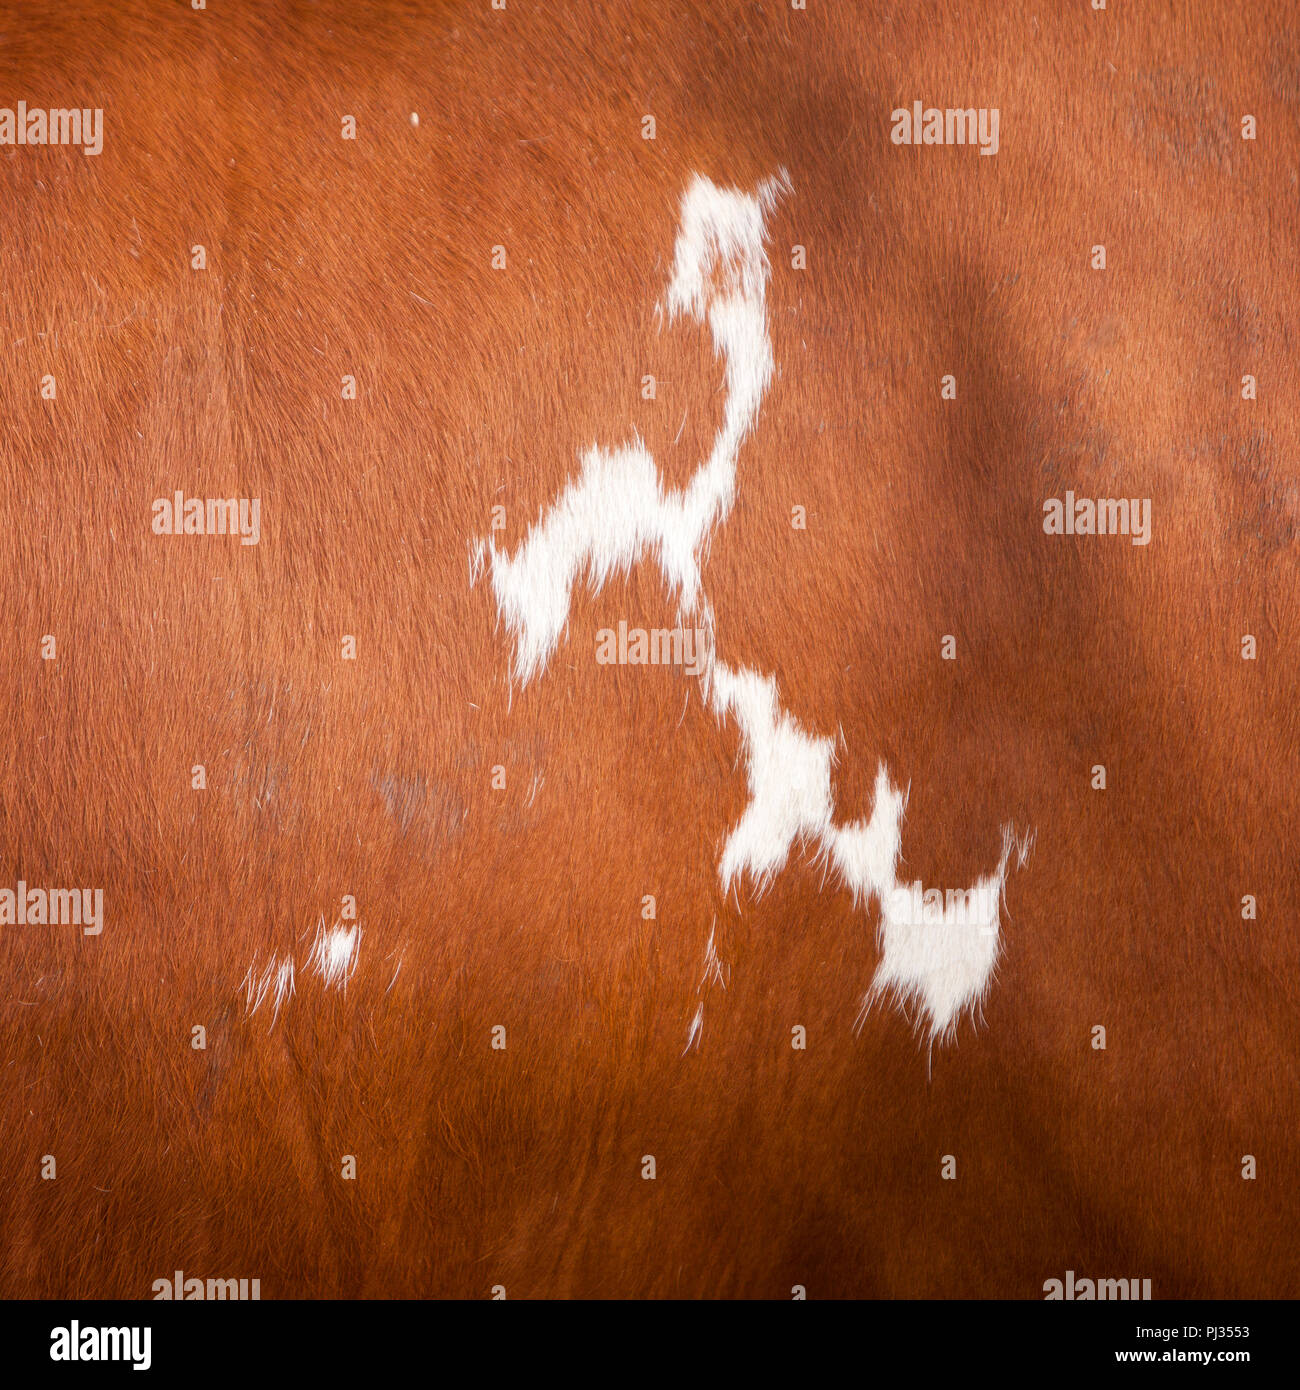 pattern on red and white hide on side of cow Stock Photo